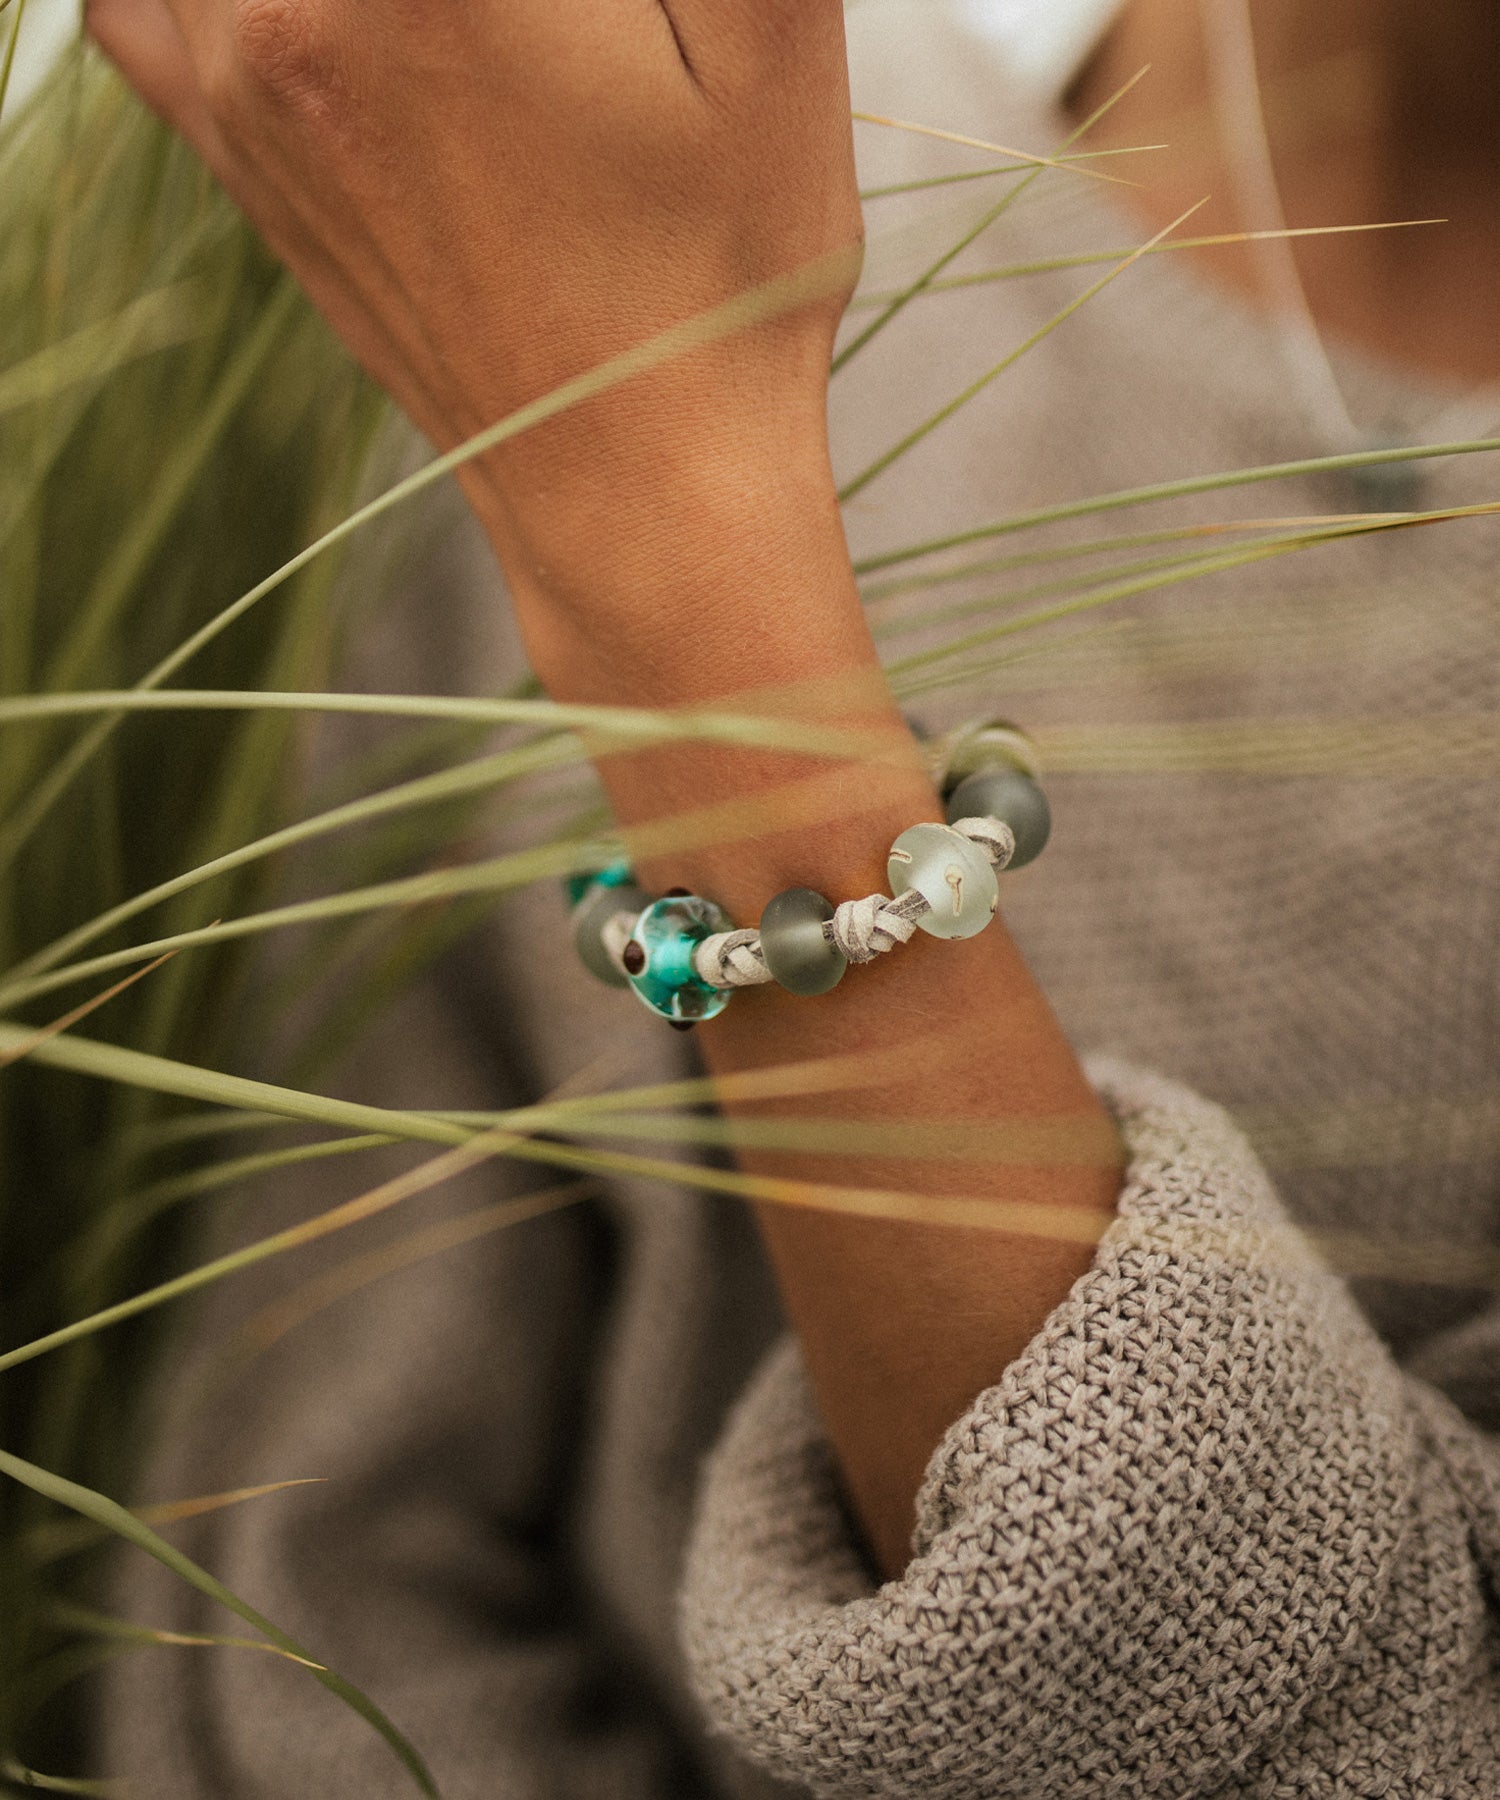 Devon surf beads on grey cord bracelet worn by woman wearing brown knitted jumper on the beach.